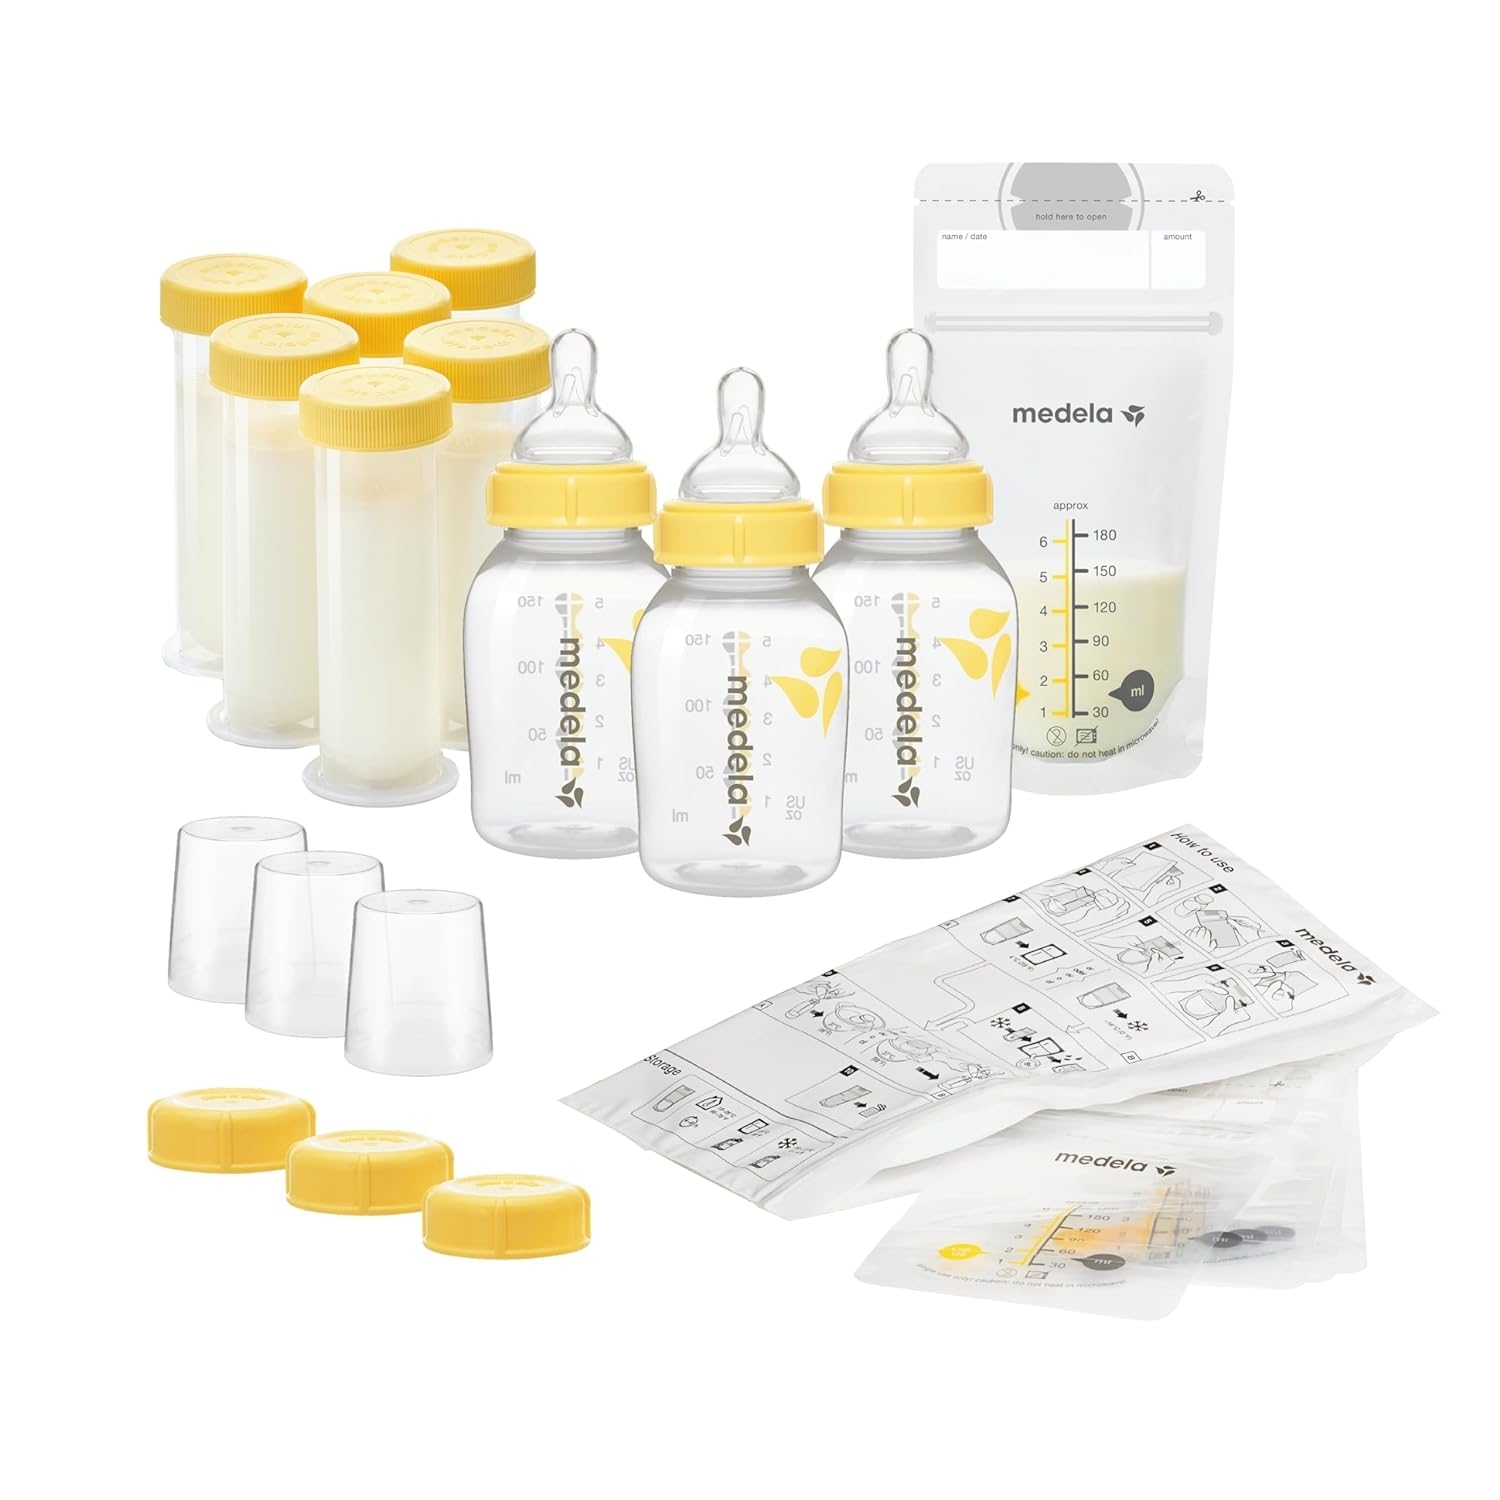 Medela breast milk storage solution set with bottles, labeling lids, bags, and tray for feeding and storing milk